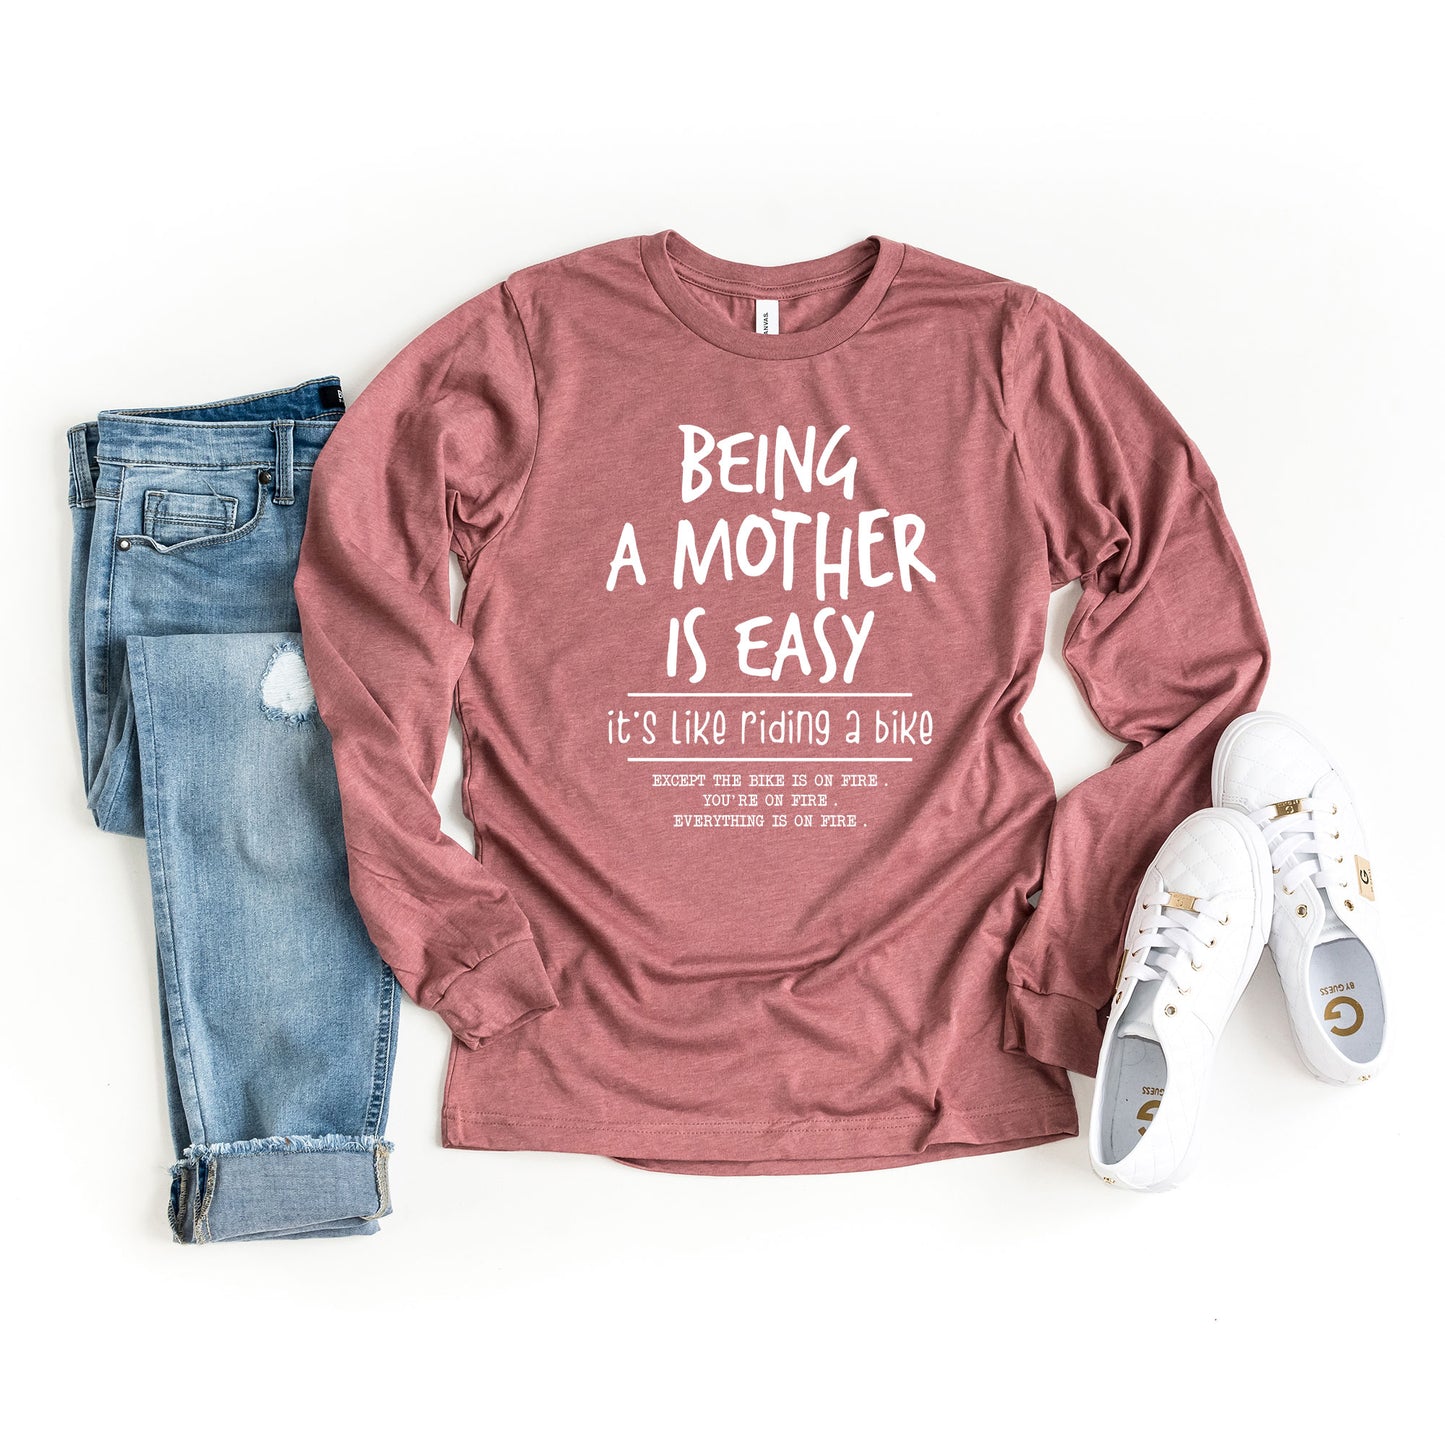 Being A Mother Is Easy | Long Sleeve Crew Neck